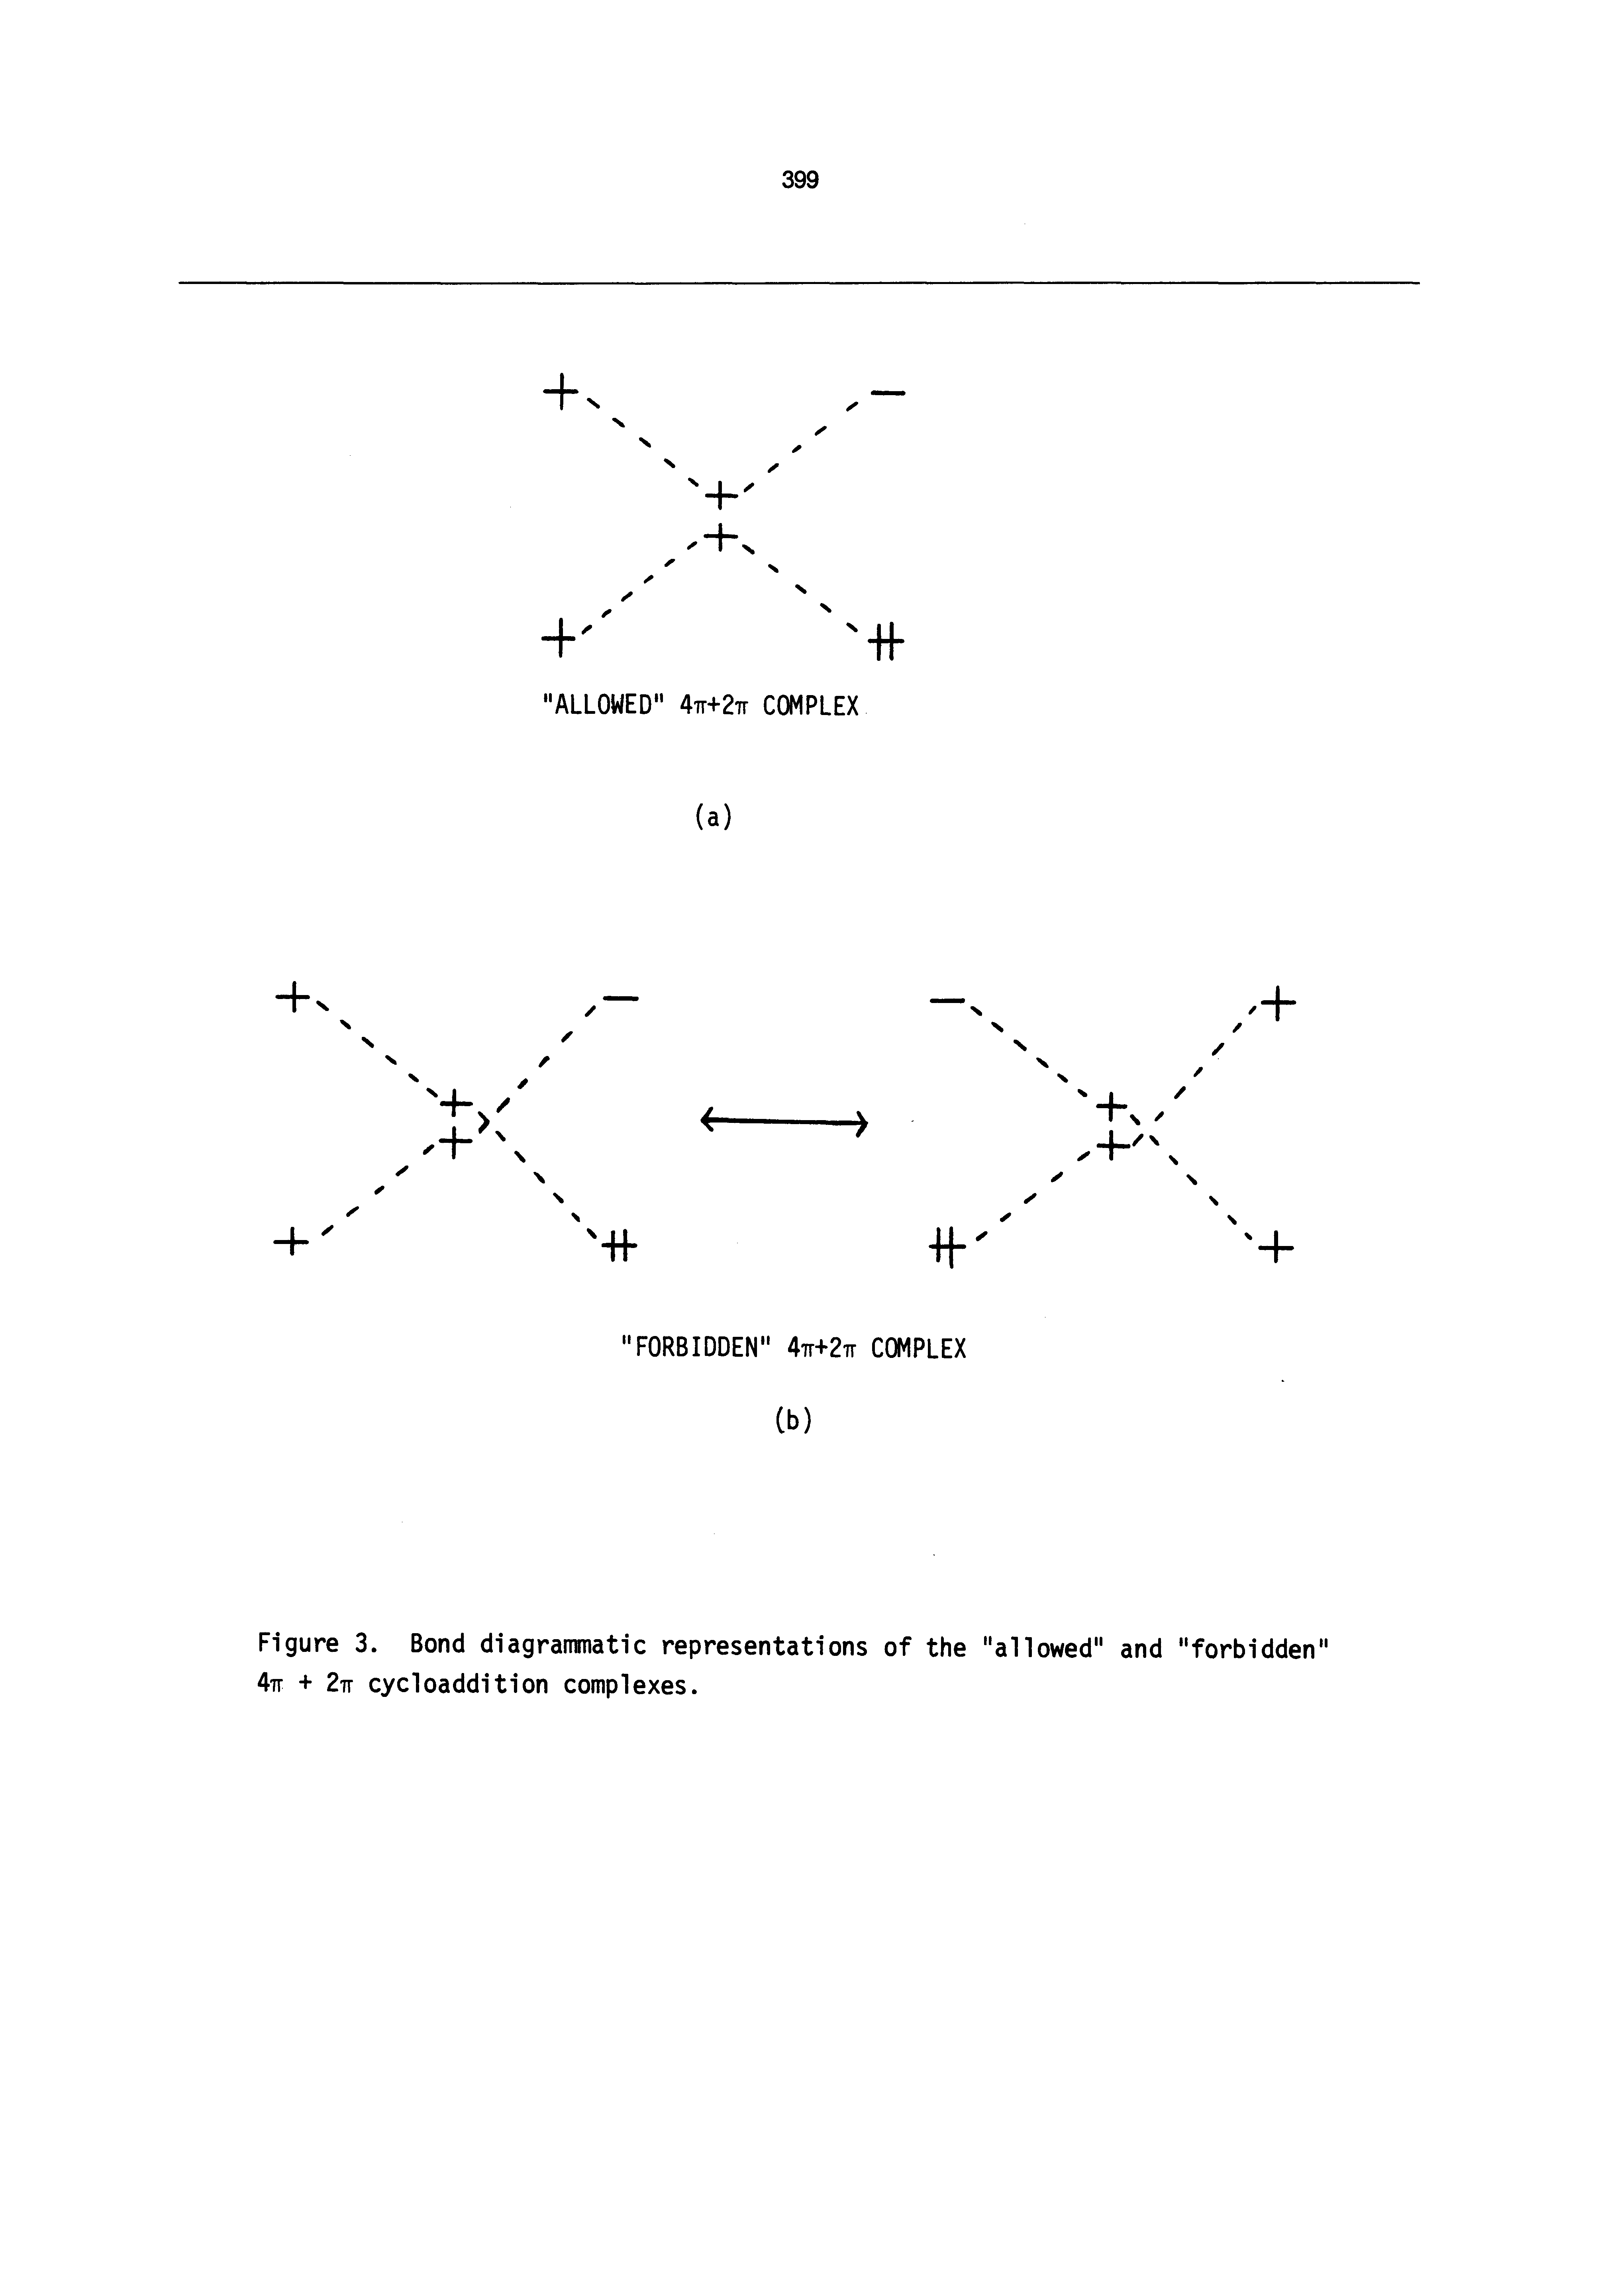 Figure 3. Bond diagrammatic representations of the "allowed" and "forbidden" 47t + 27t cycloaddition complexes.